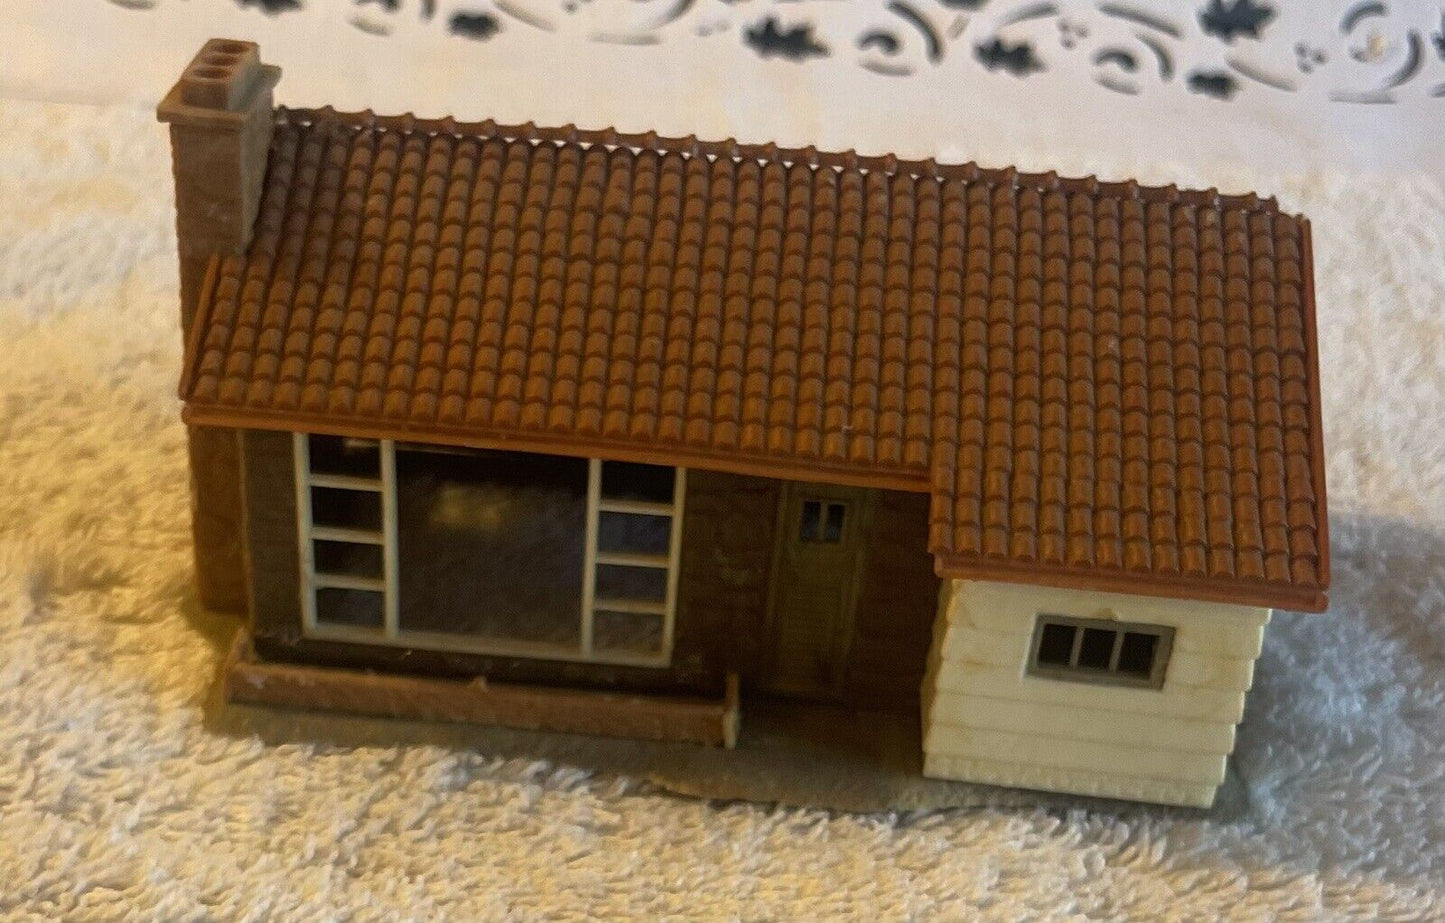 HO Scale Faller 02102 Ranch House. Assembled. C-6 Very Good Condition